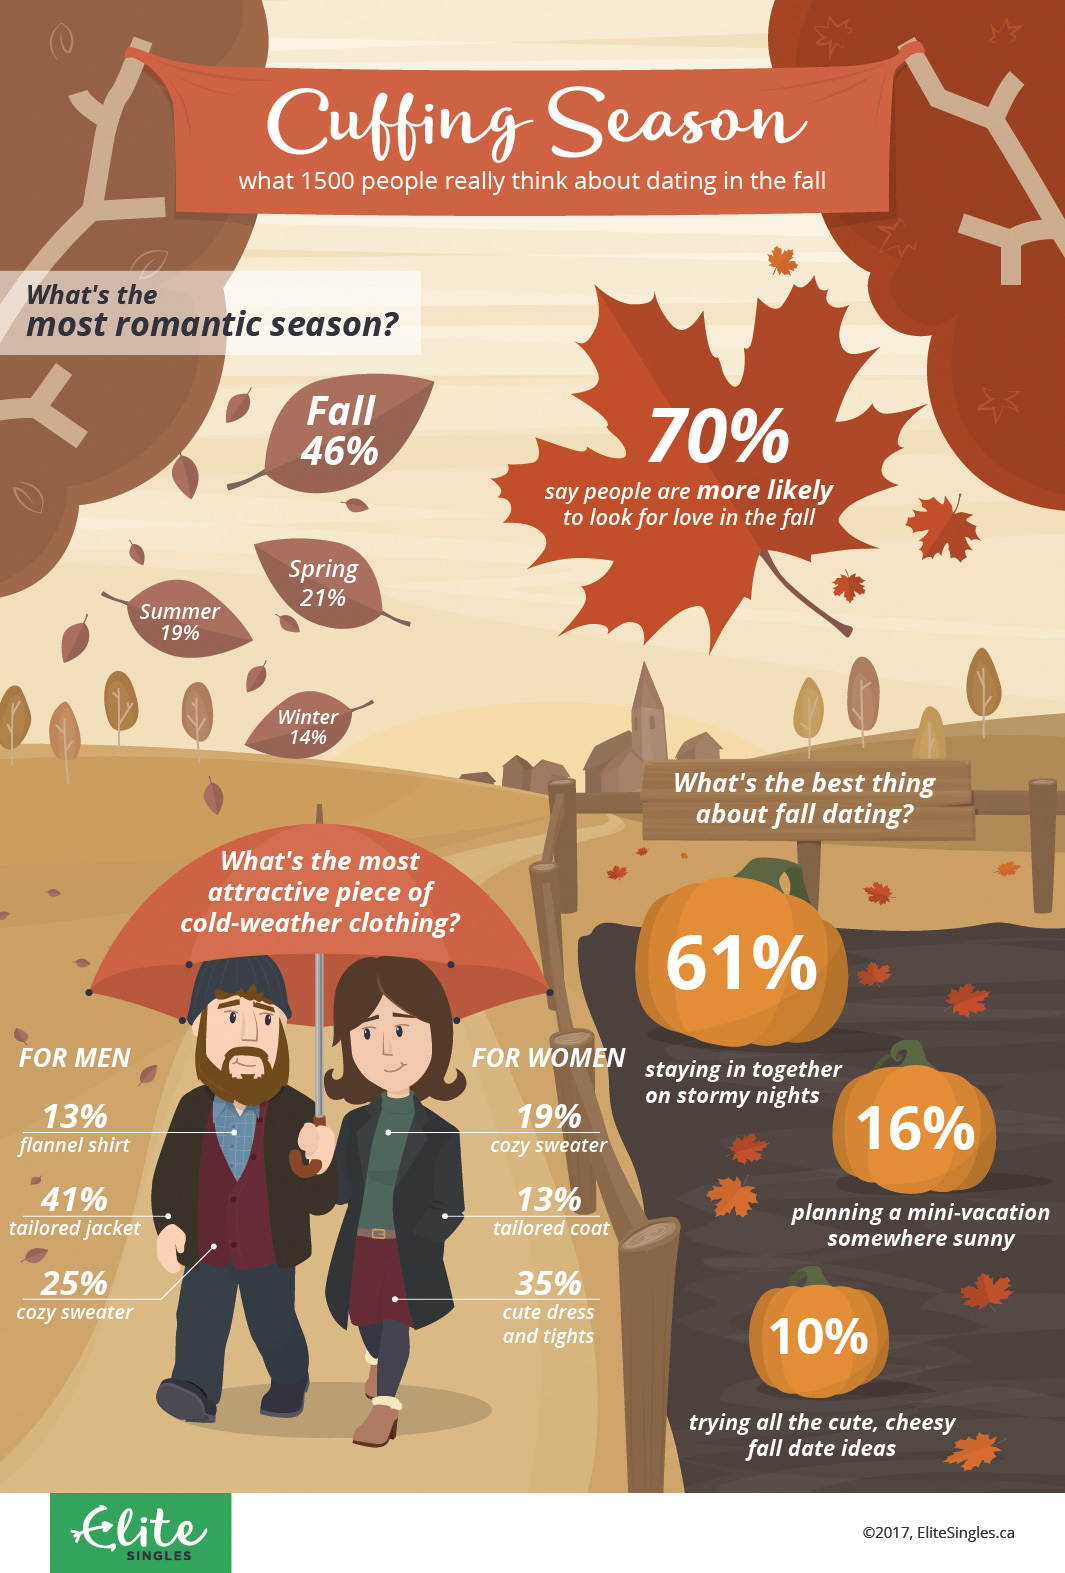 Cuffing season  - is it real? Infographic from EliteSingles